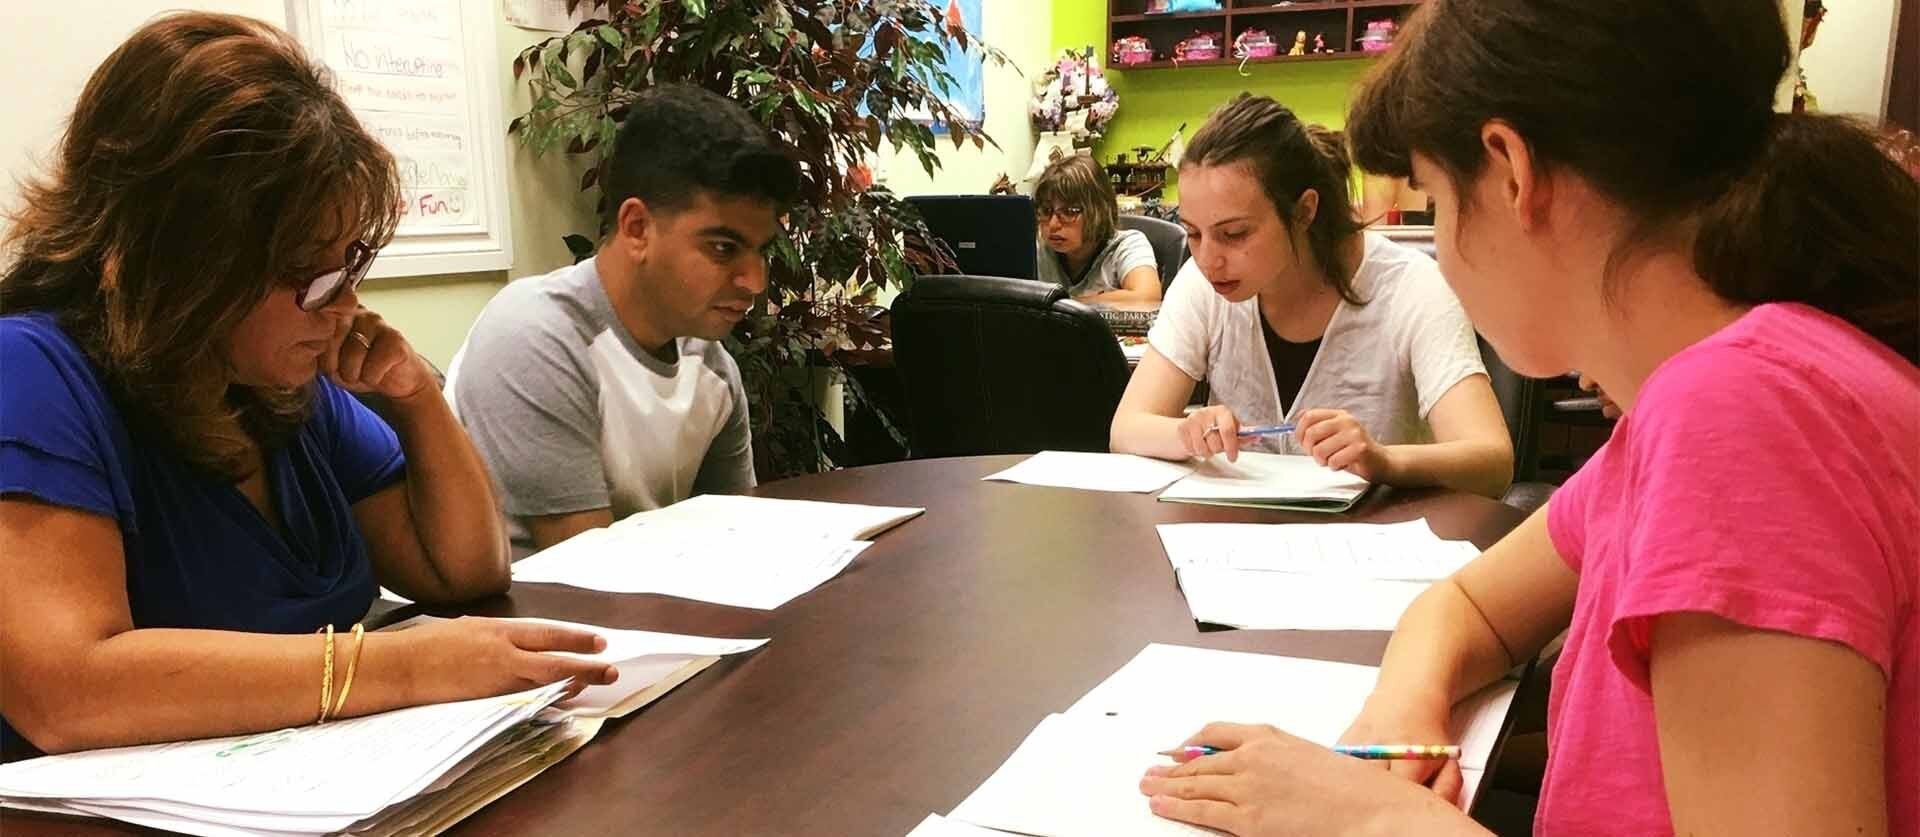 Students studying as part of Life Skills Program